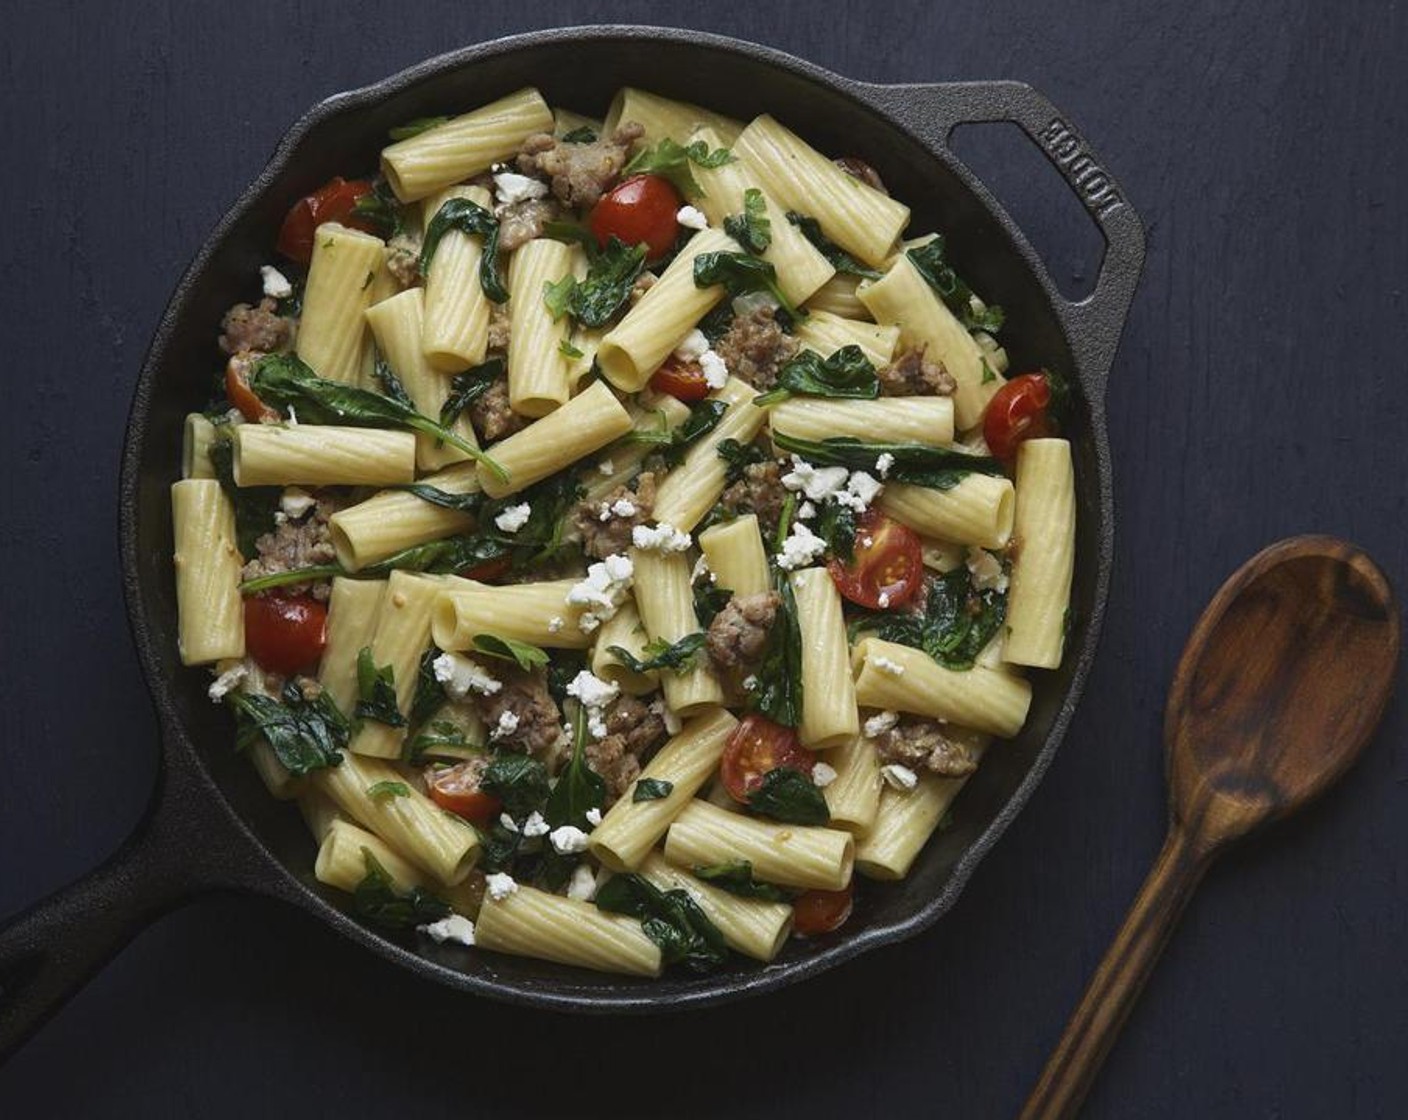 Rigatoni Pasta and Turkey Sausage with Spinach